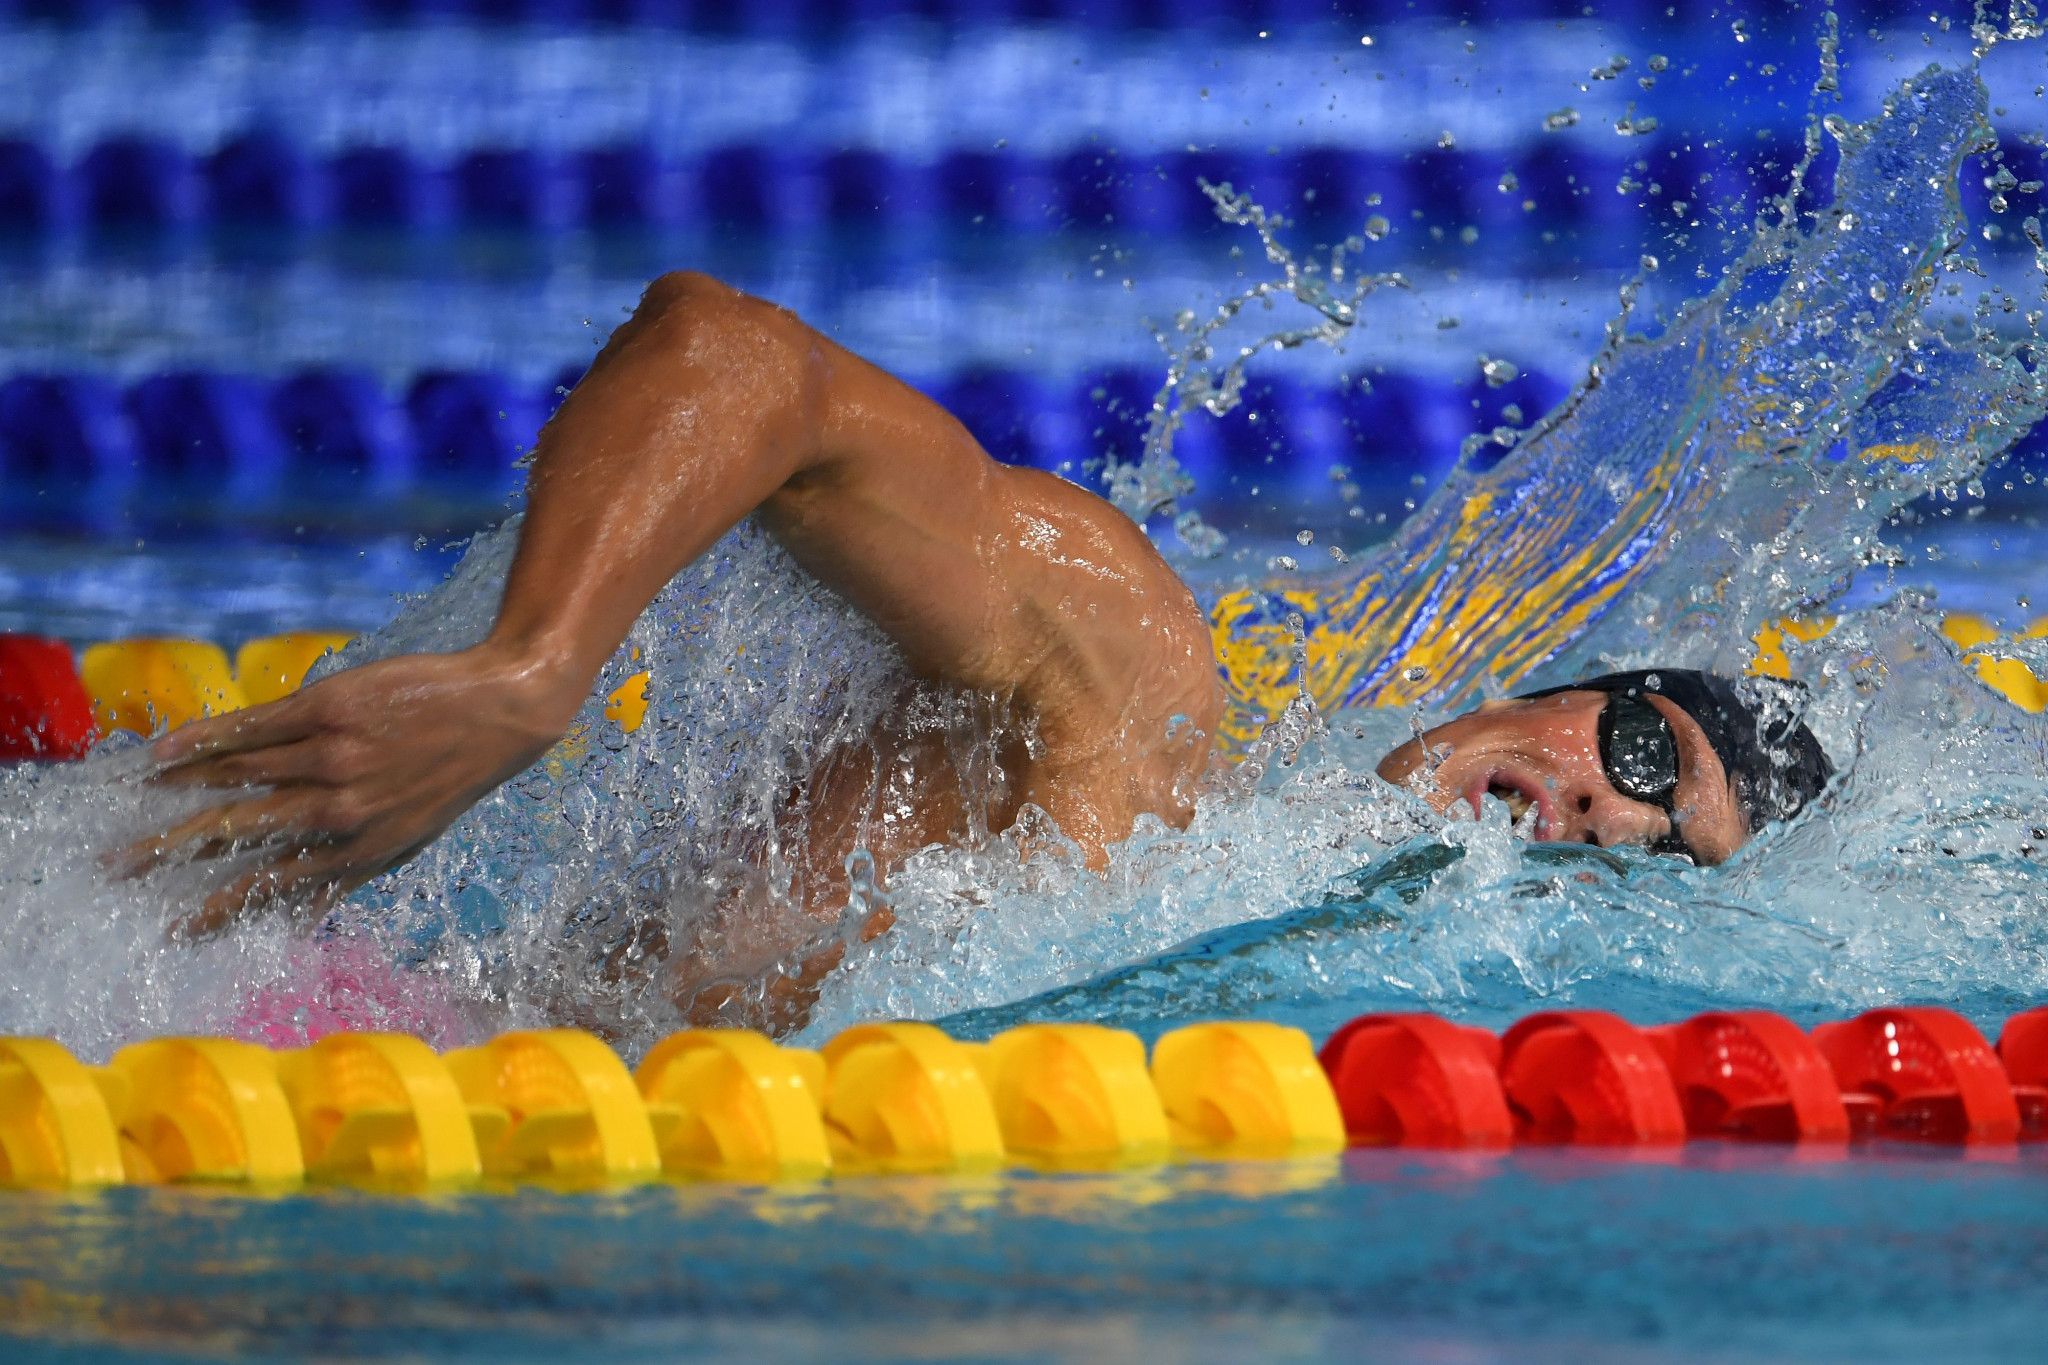 Ukraine's Mykhailo Romanchuk performed superbly on his way to winning the men's 400m freestyle gold medal ©Getty Images